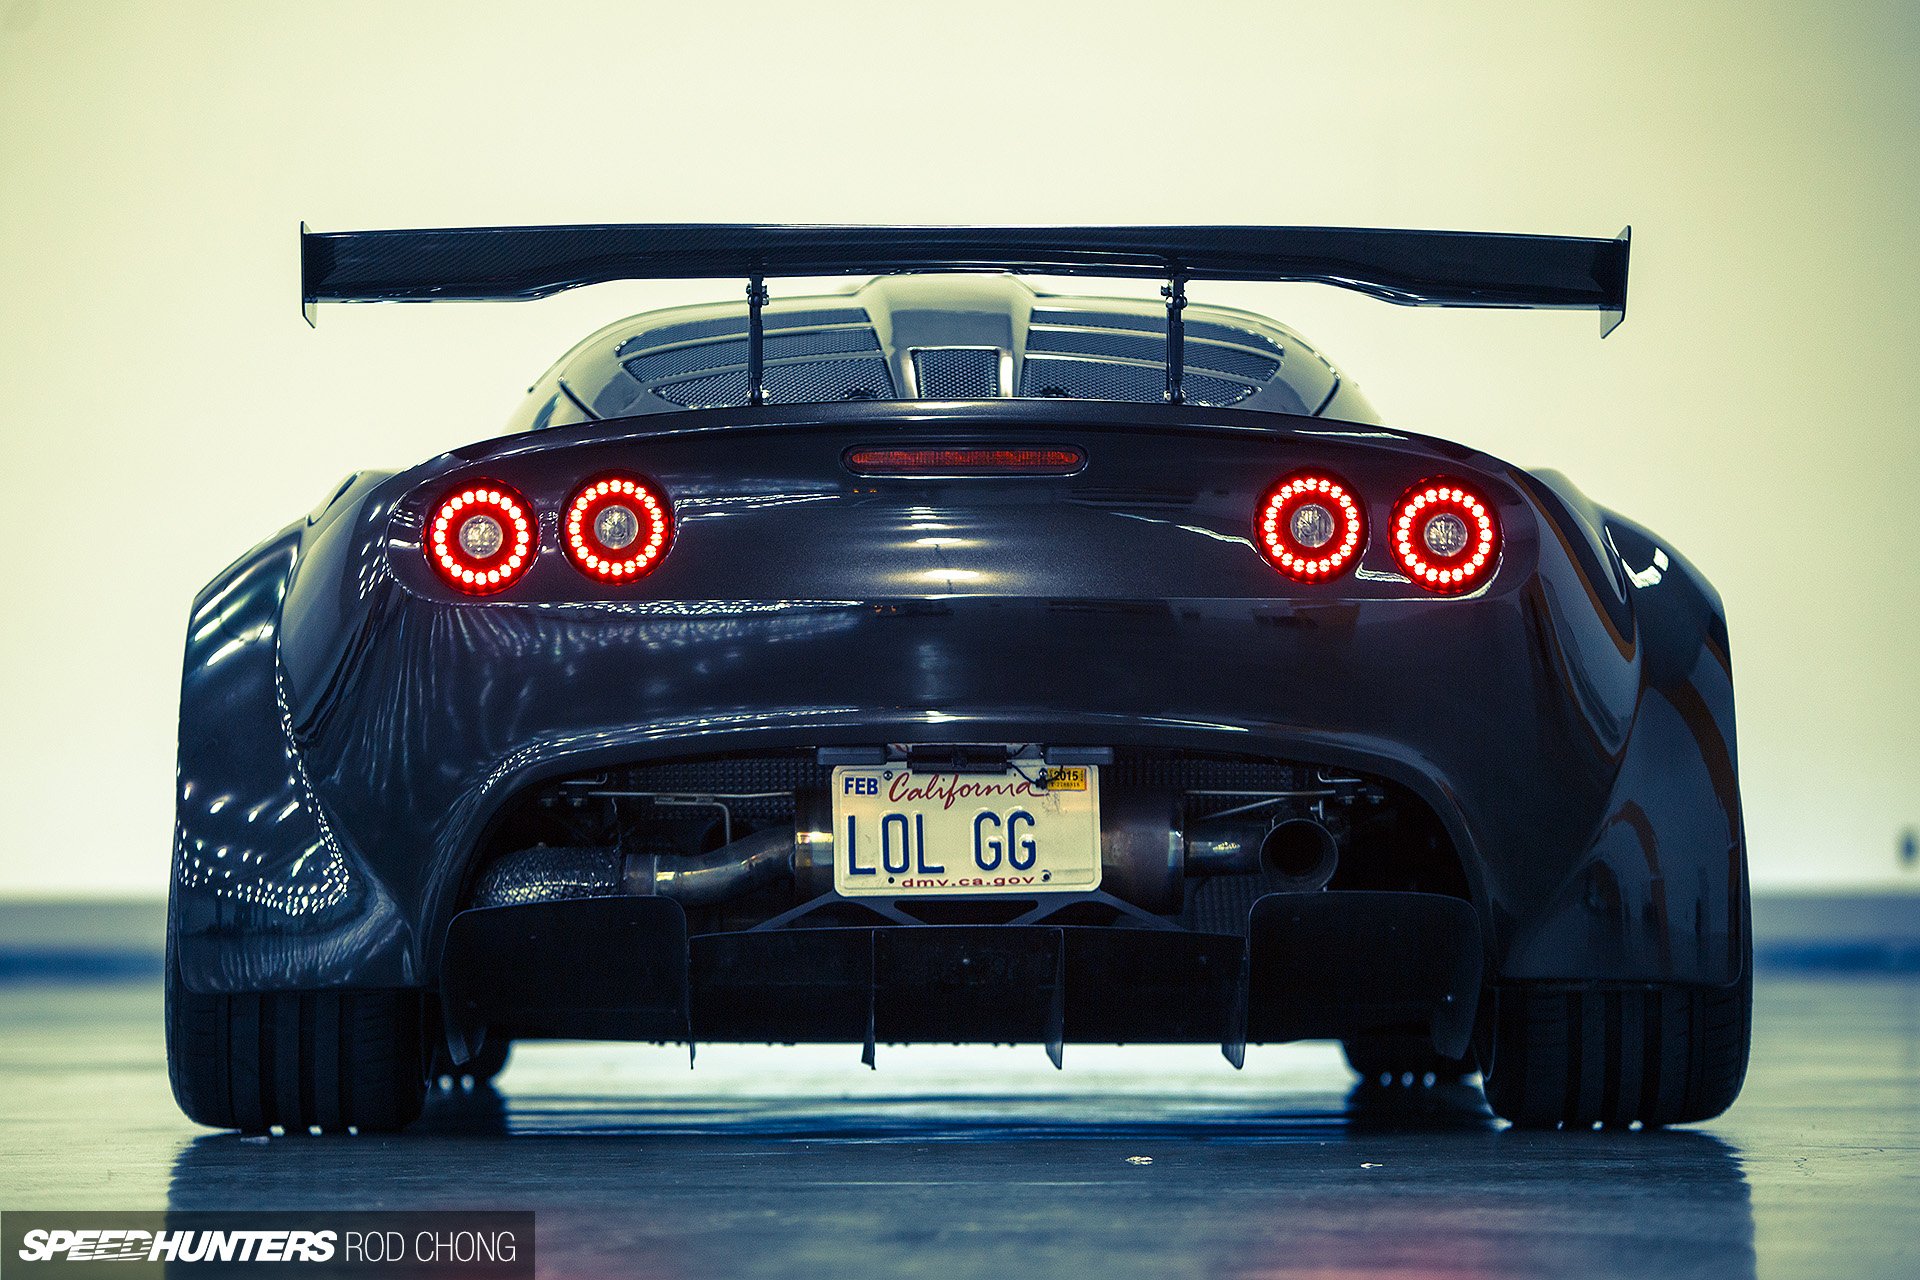 elise, Exige, Lotus, Stance, Supercharger, Widebody, Tuning, Supercar Wallpaper